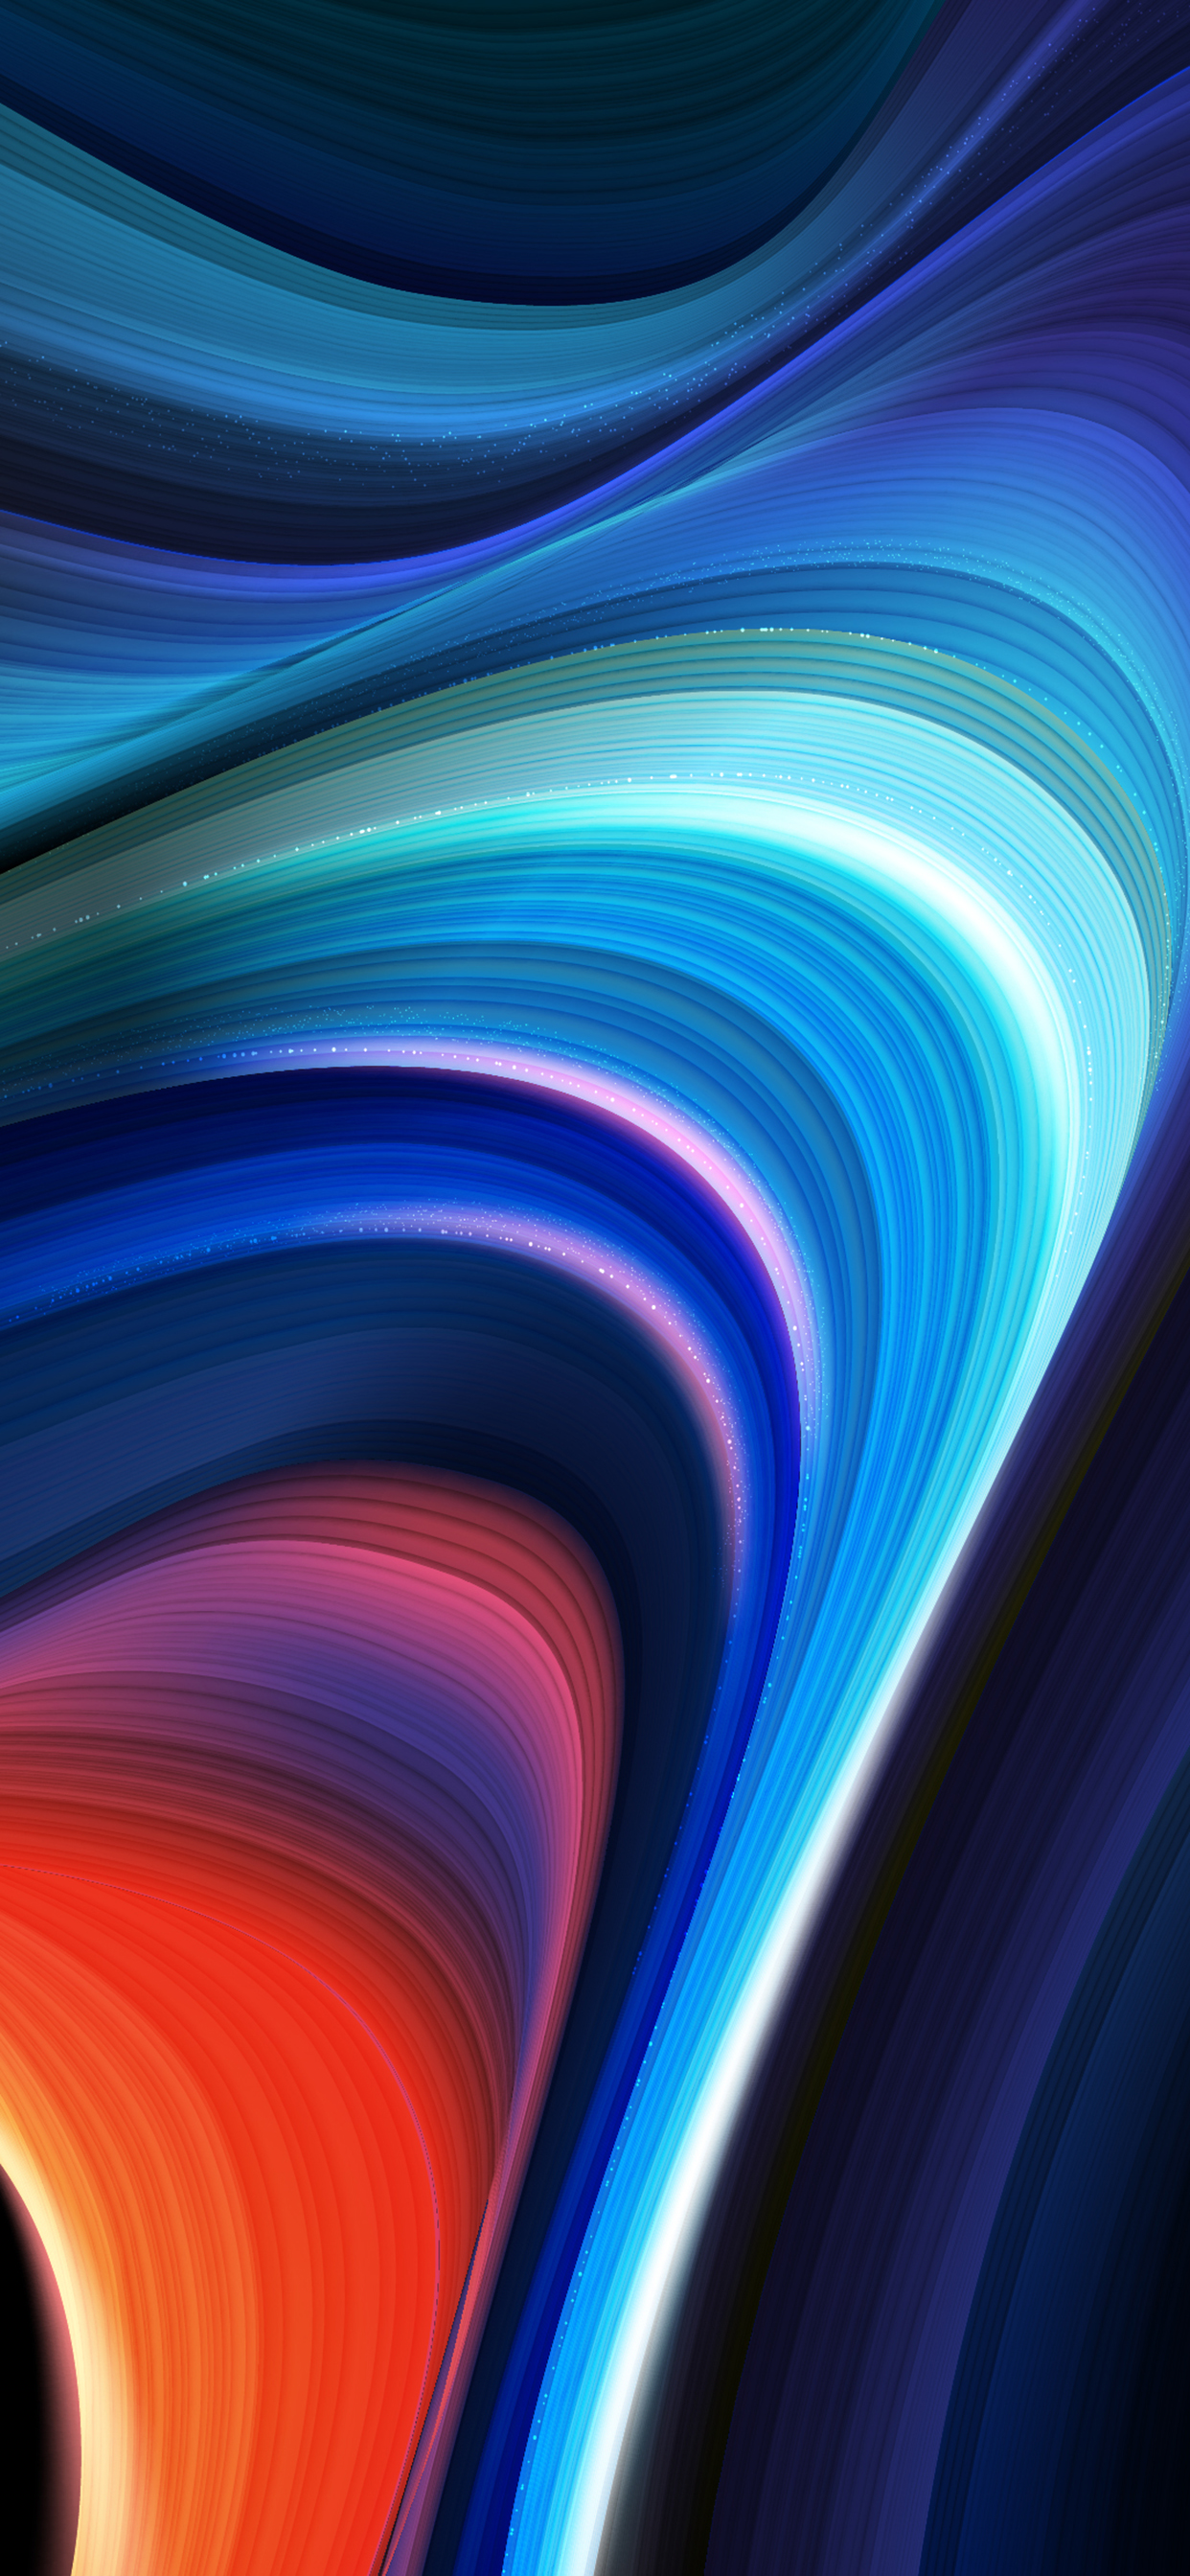 Micromax In Note 1 Wallpaper GizDev (5) by GalacticBoost on DeviantArt